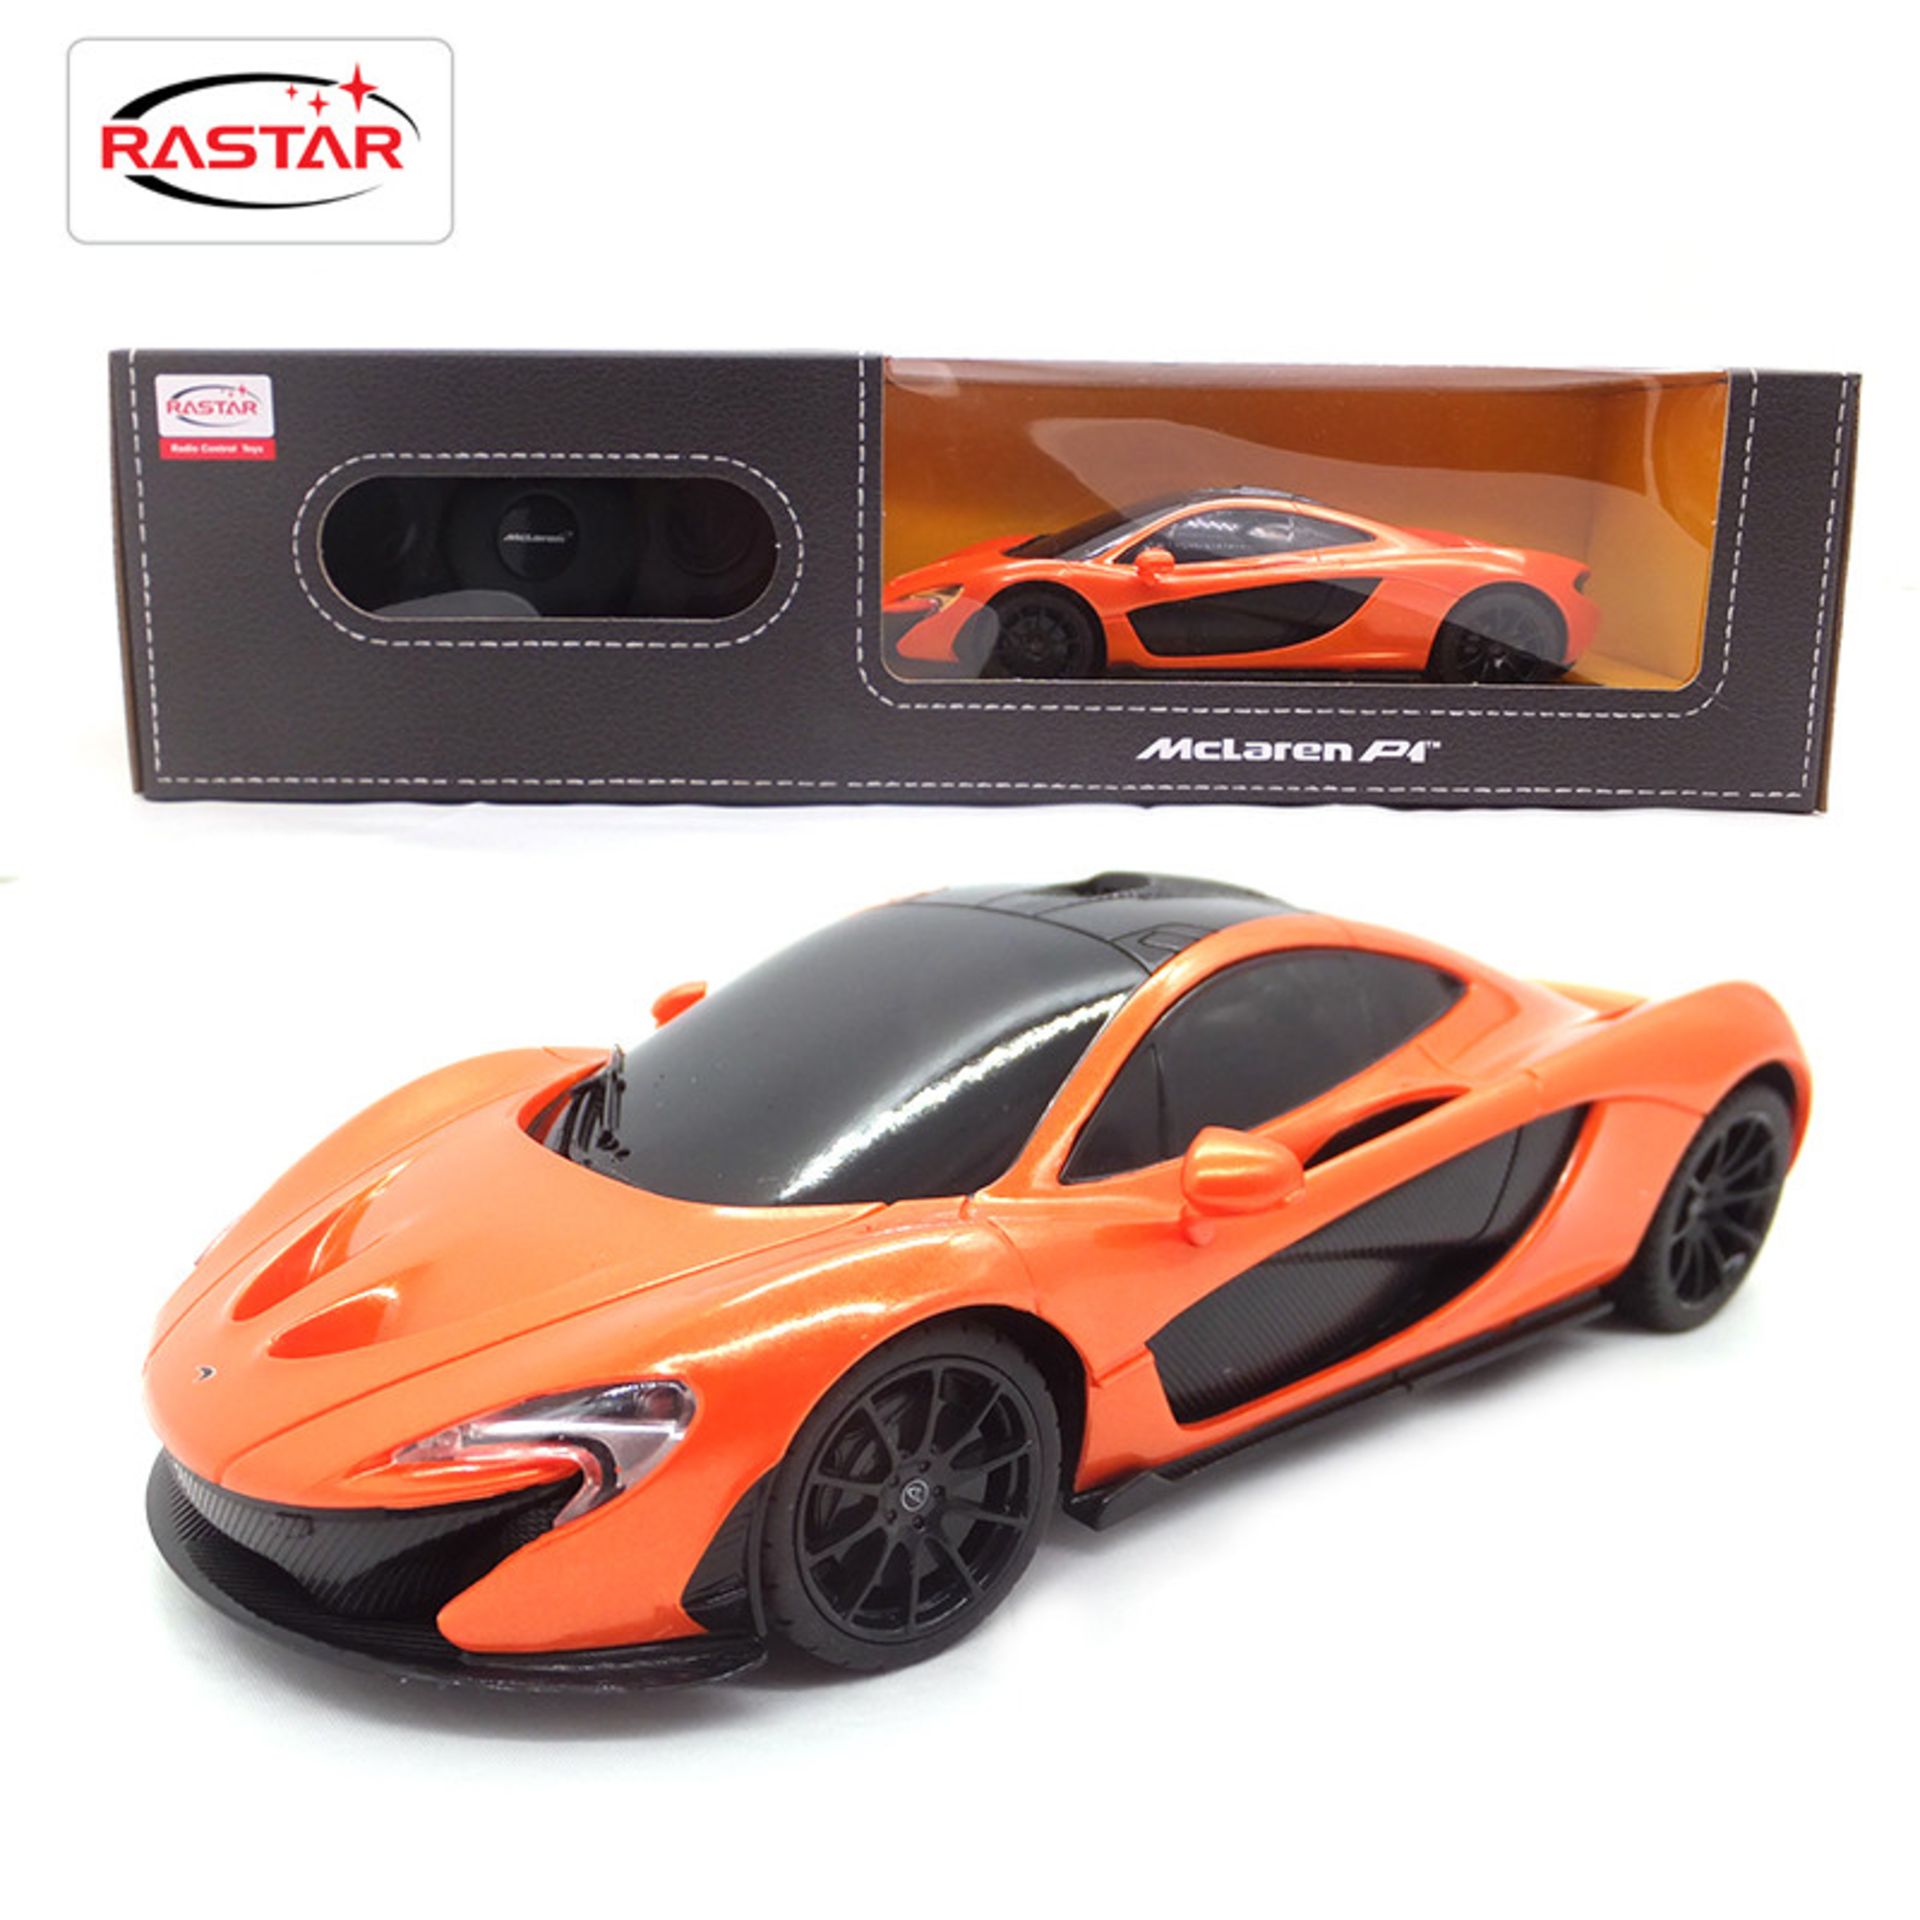 V *TRADE QTY* Brand New Officially Licensed 1/24 Scale McLaren P1 Full Function Radio Controlled Car